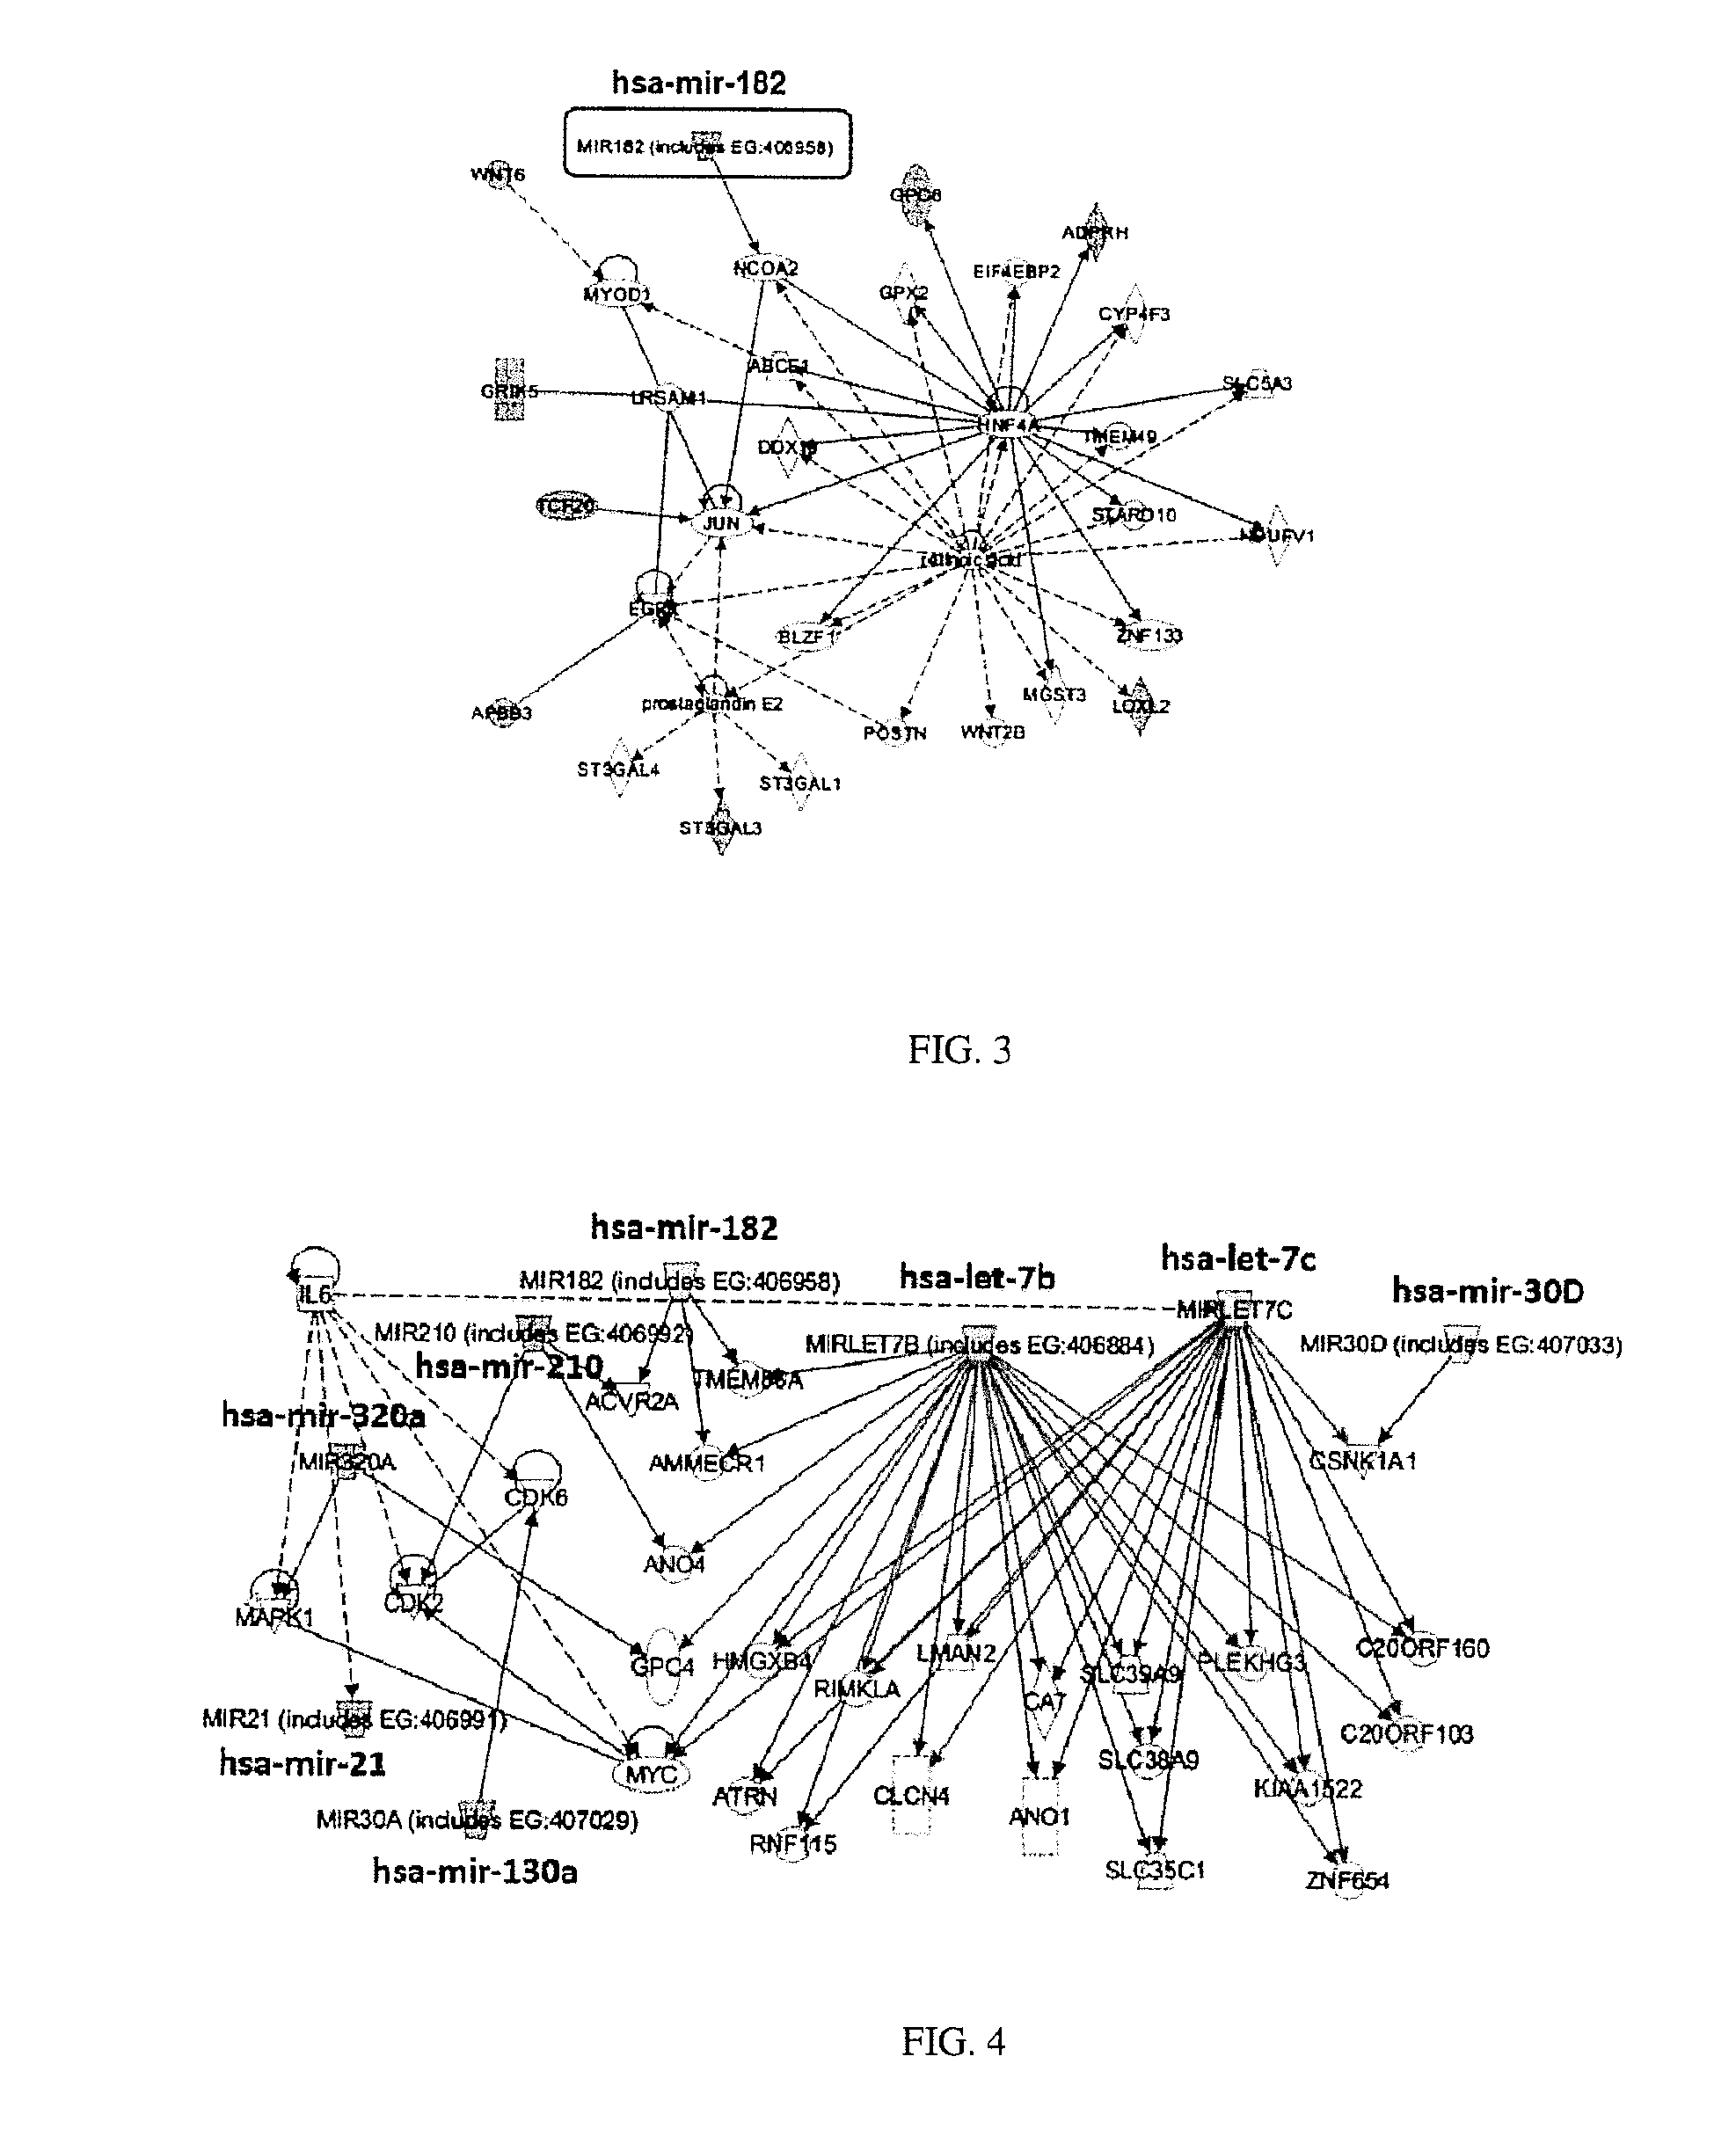 Methods for selecting competent oocytes and competent embryos with high potential for pregnancy outcome